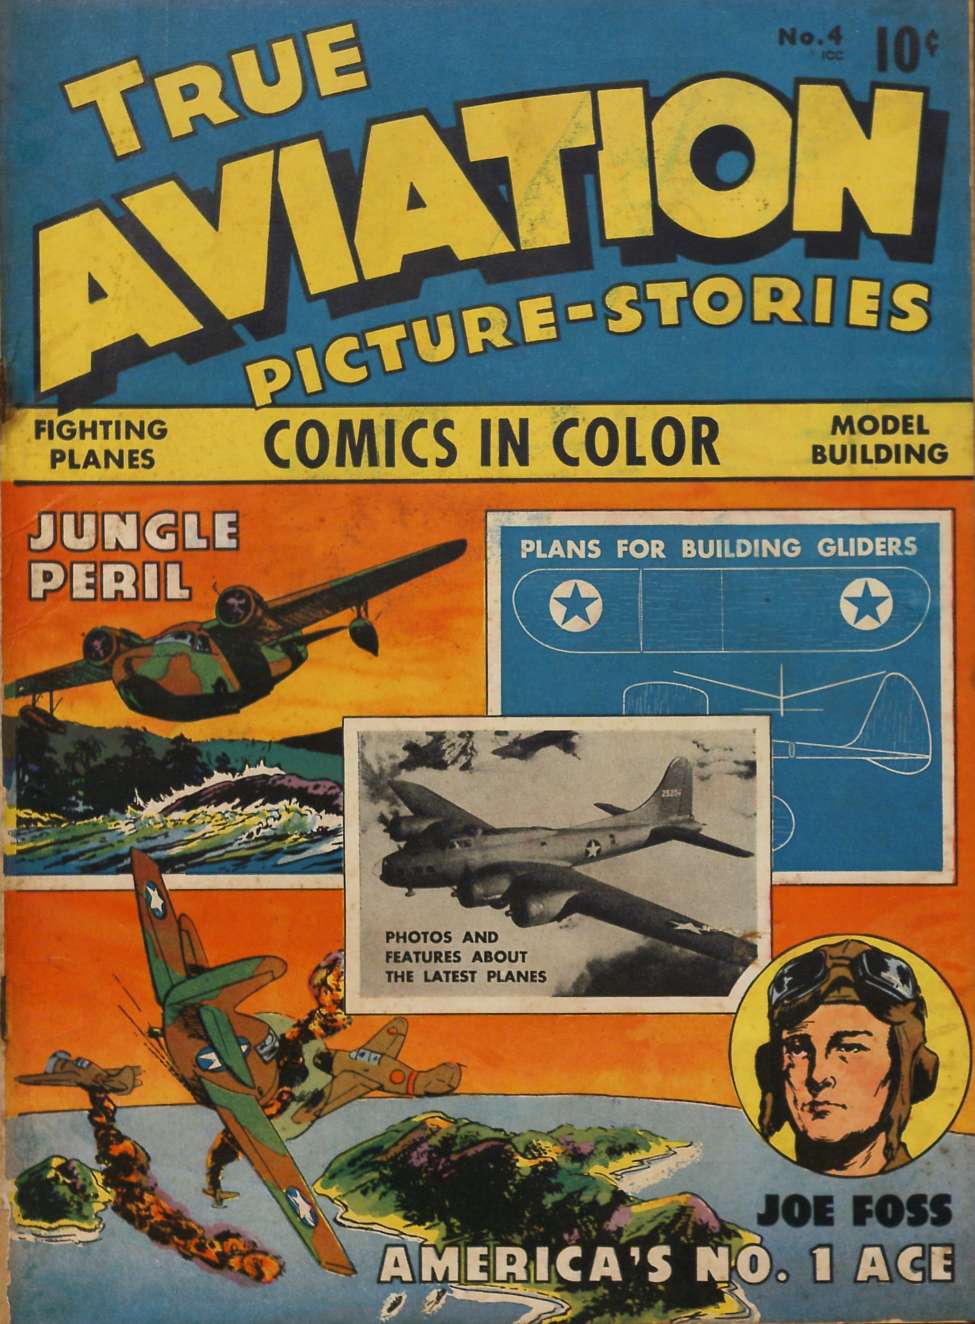 Comic Book Cover For True Aviation Picture Stories 4